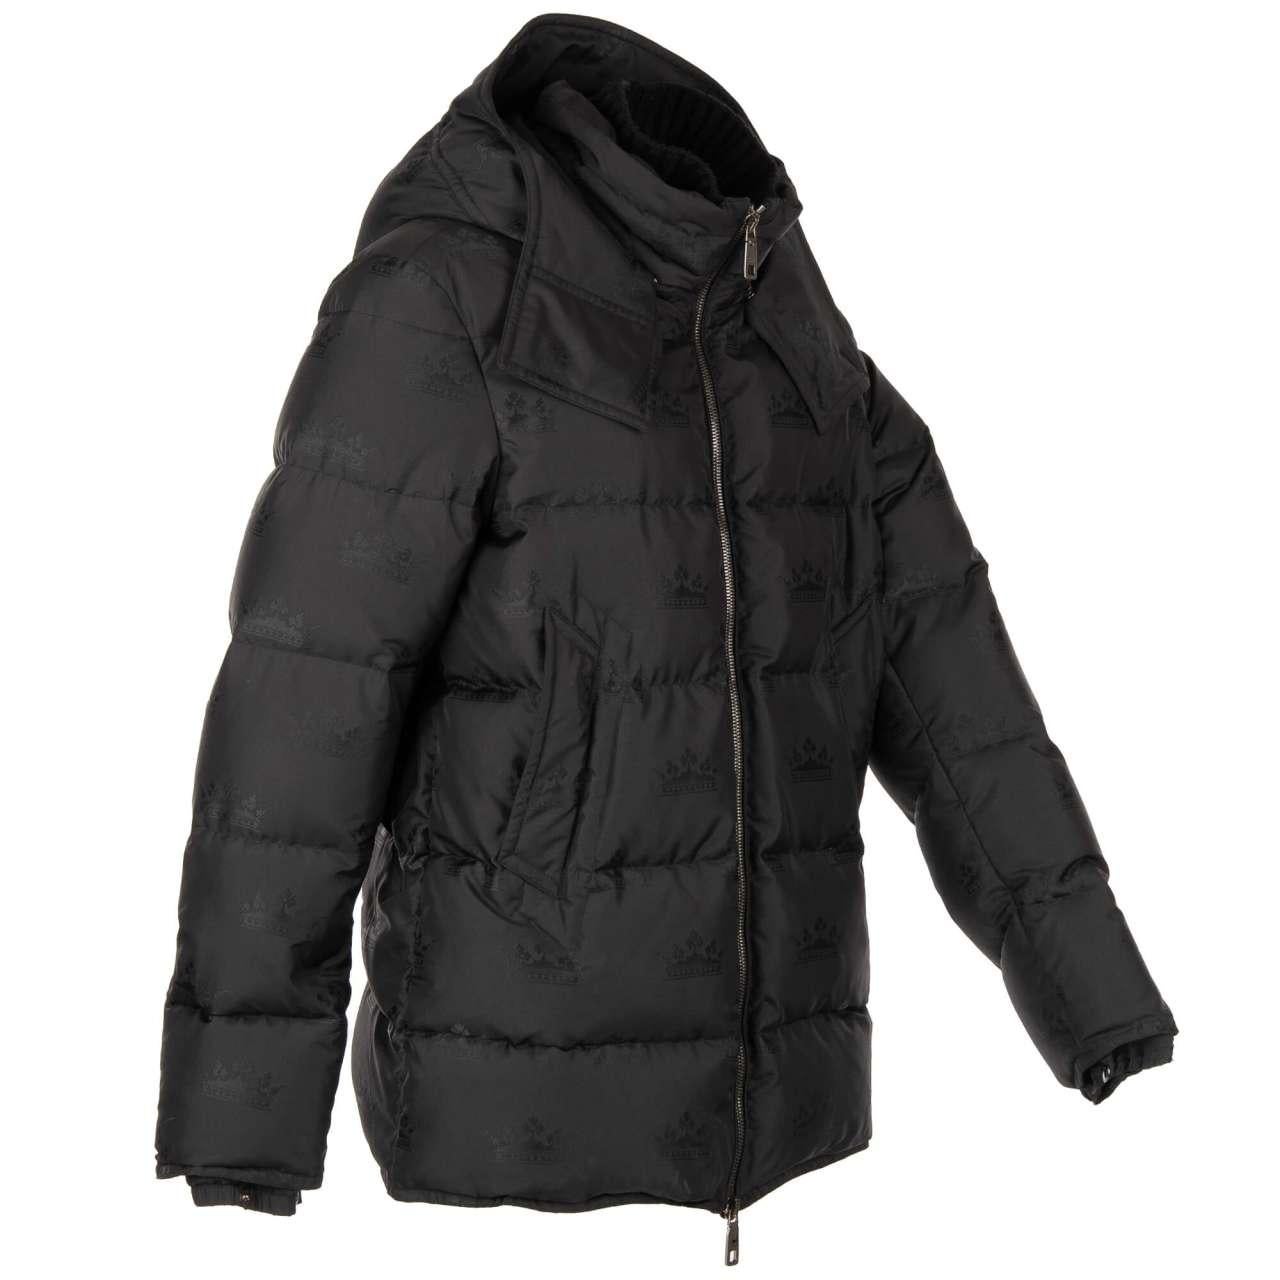 D&G Crowns Textured Hooded Down Jacket with Knit Details Black 50 M-L In Excellent Condition For Sale In Erkrath, DE